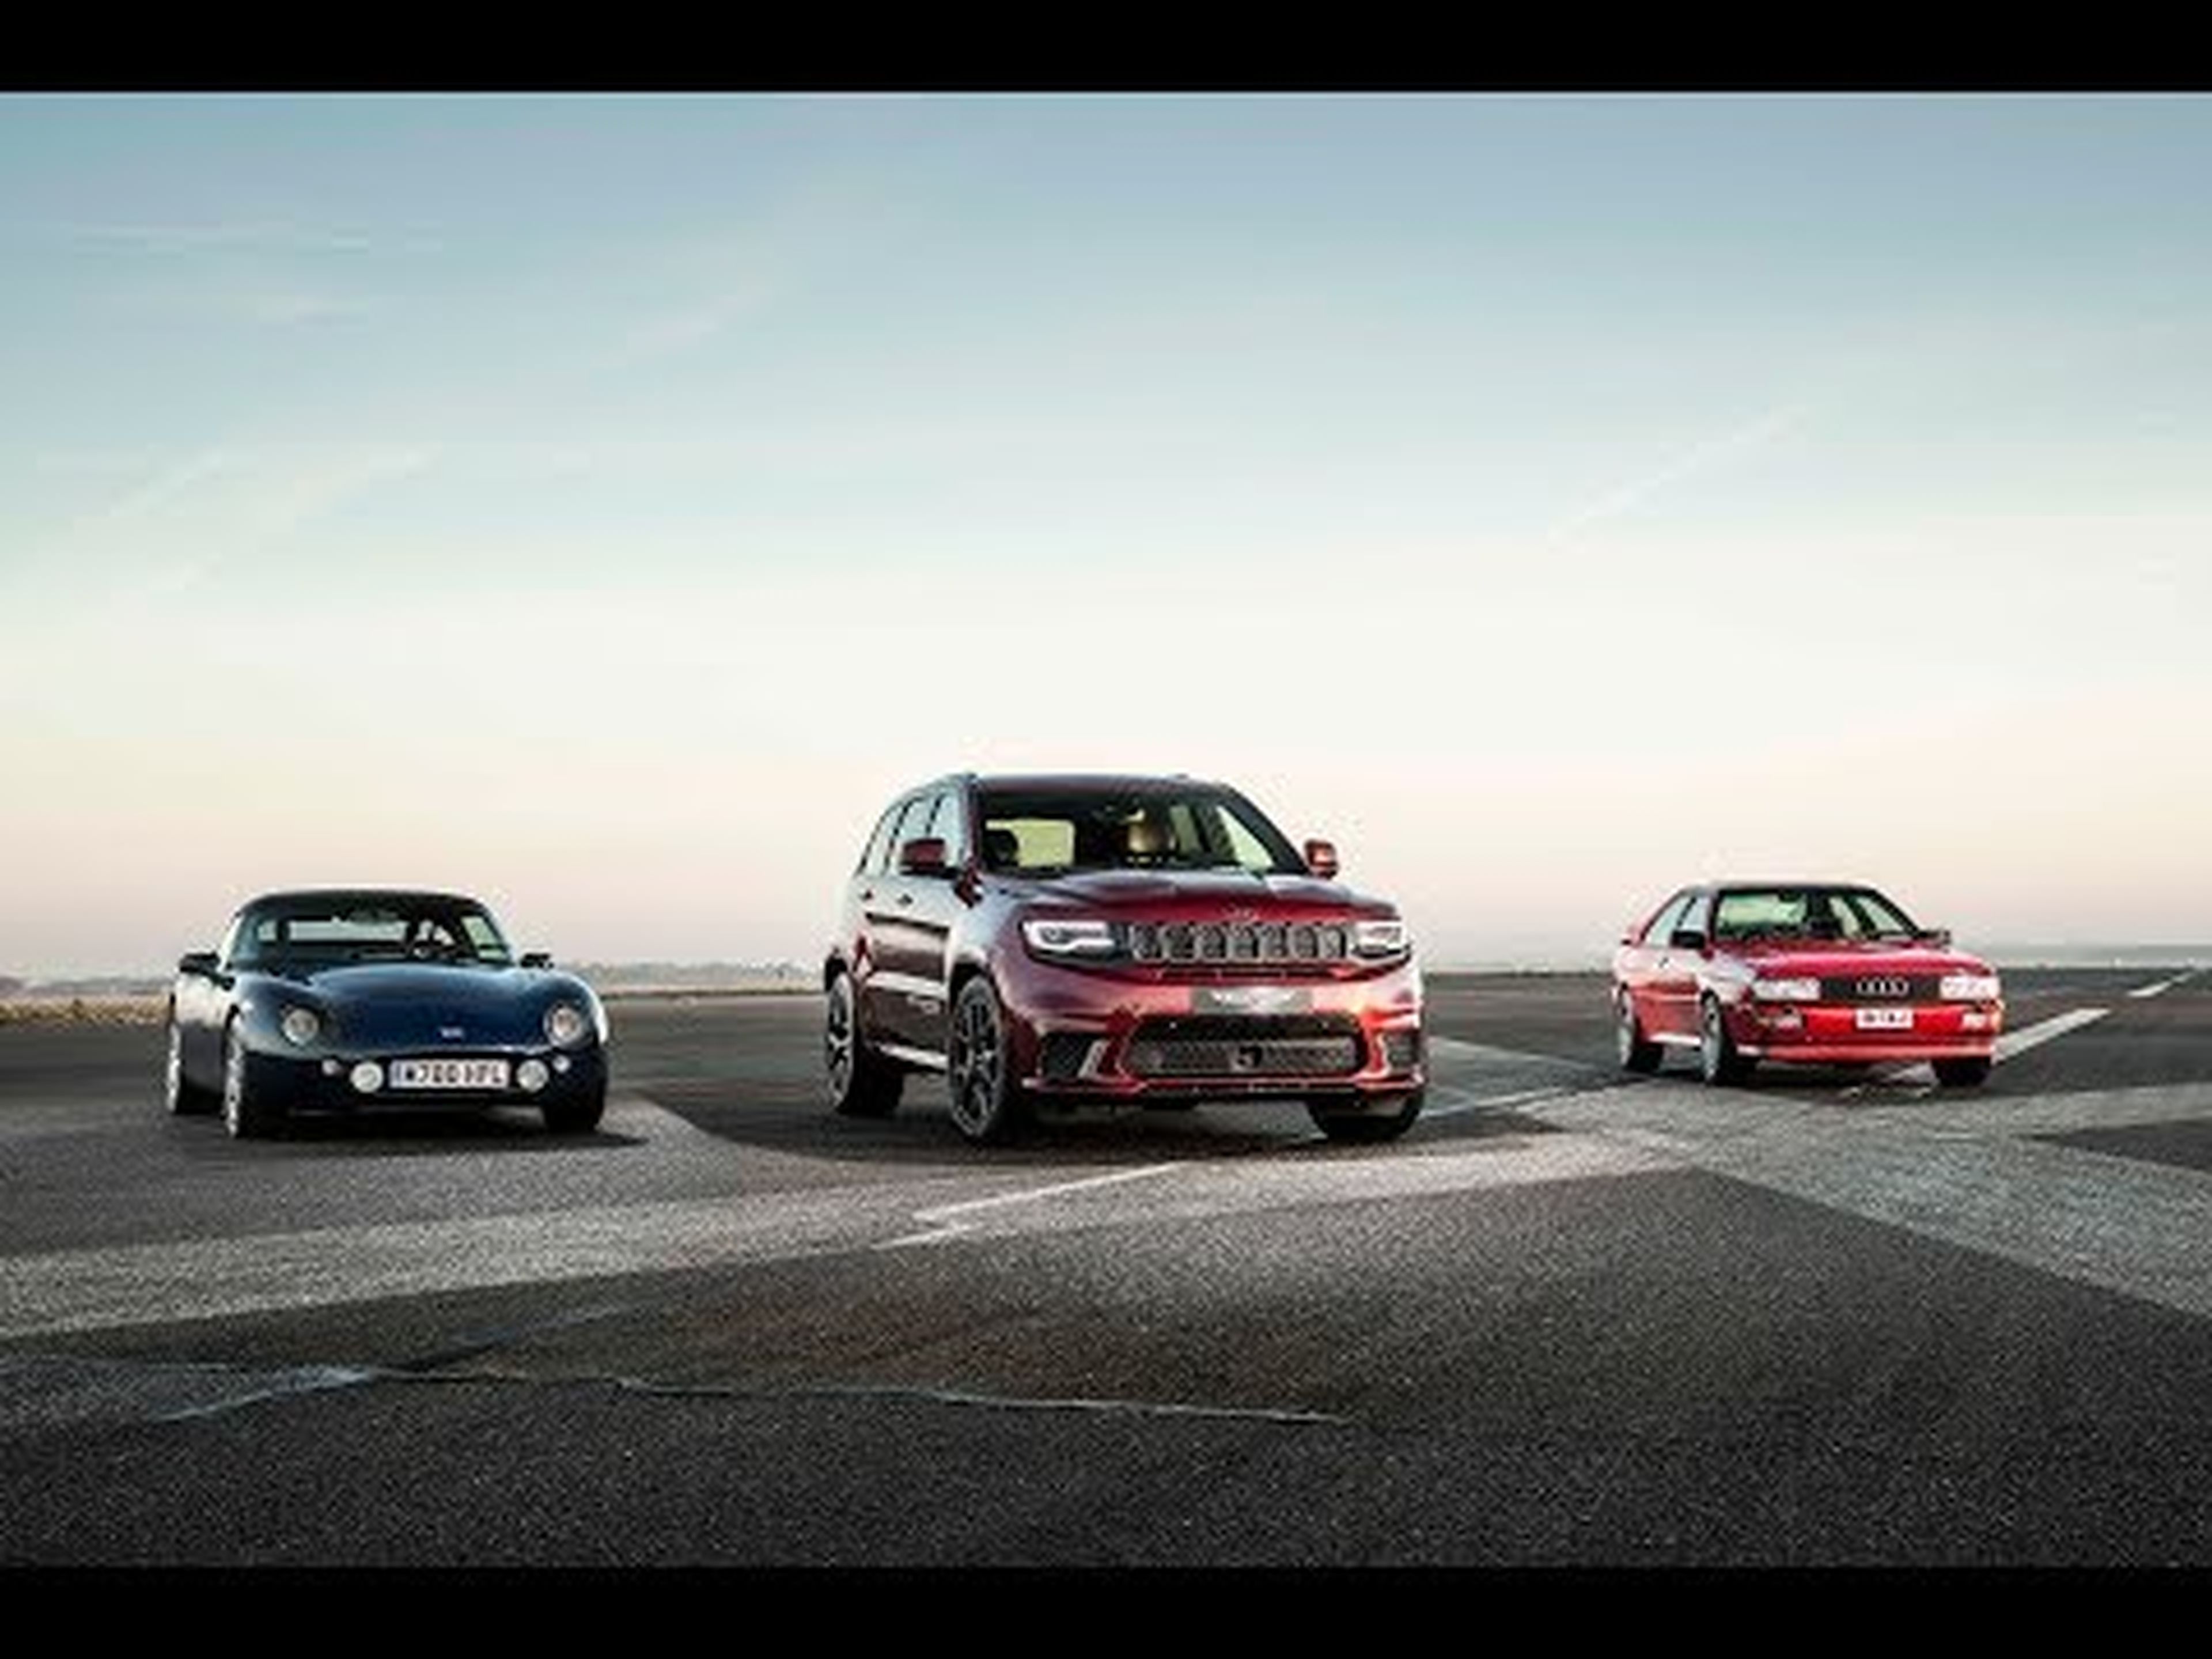 Jeep drag races Grand Cherokee Trackhawk against Audi Quattro and TVR Griffith